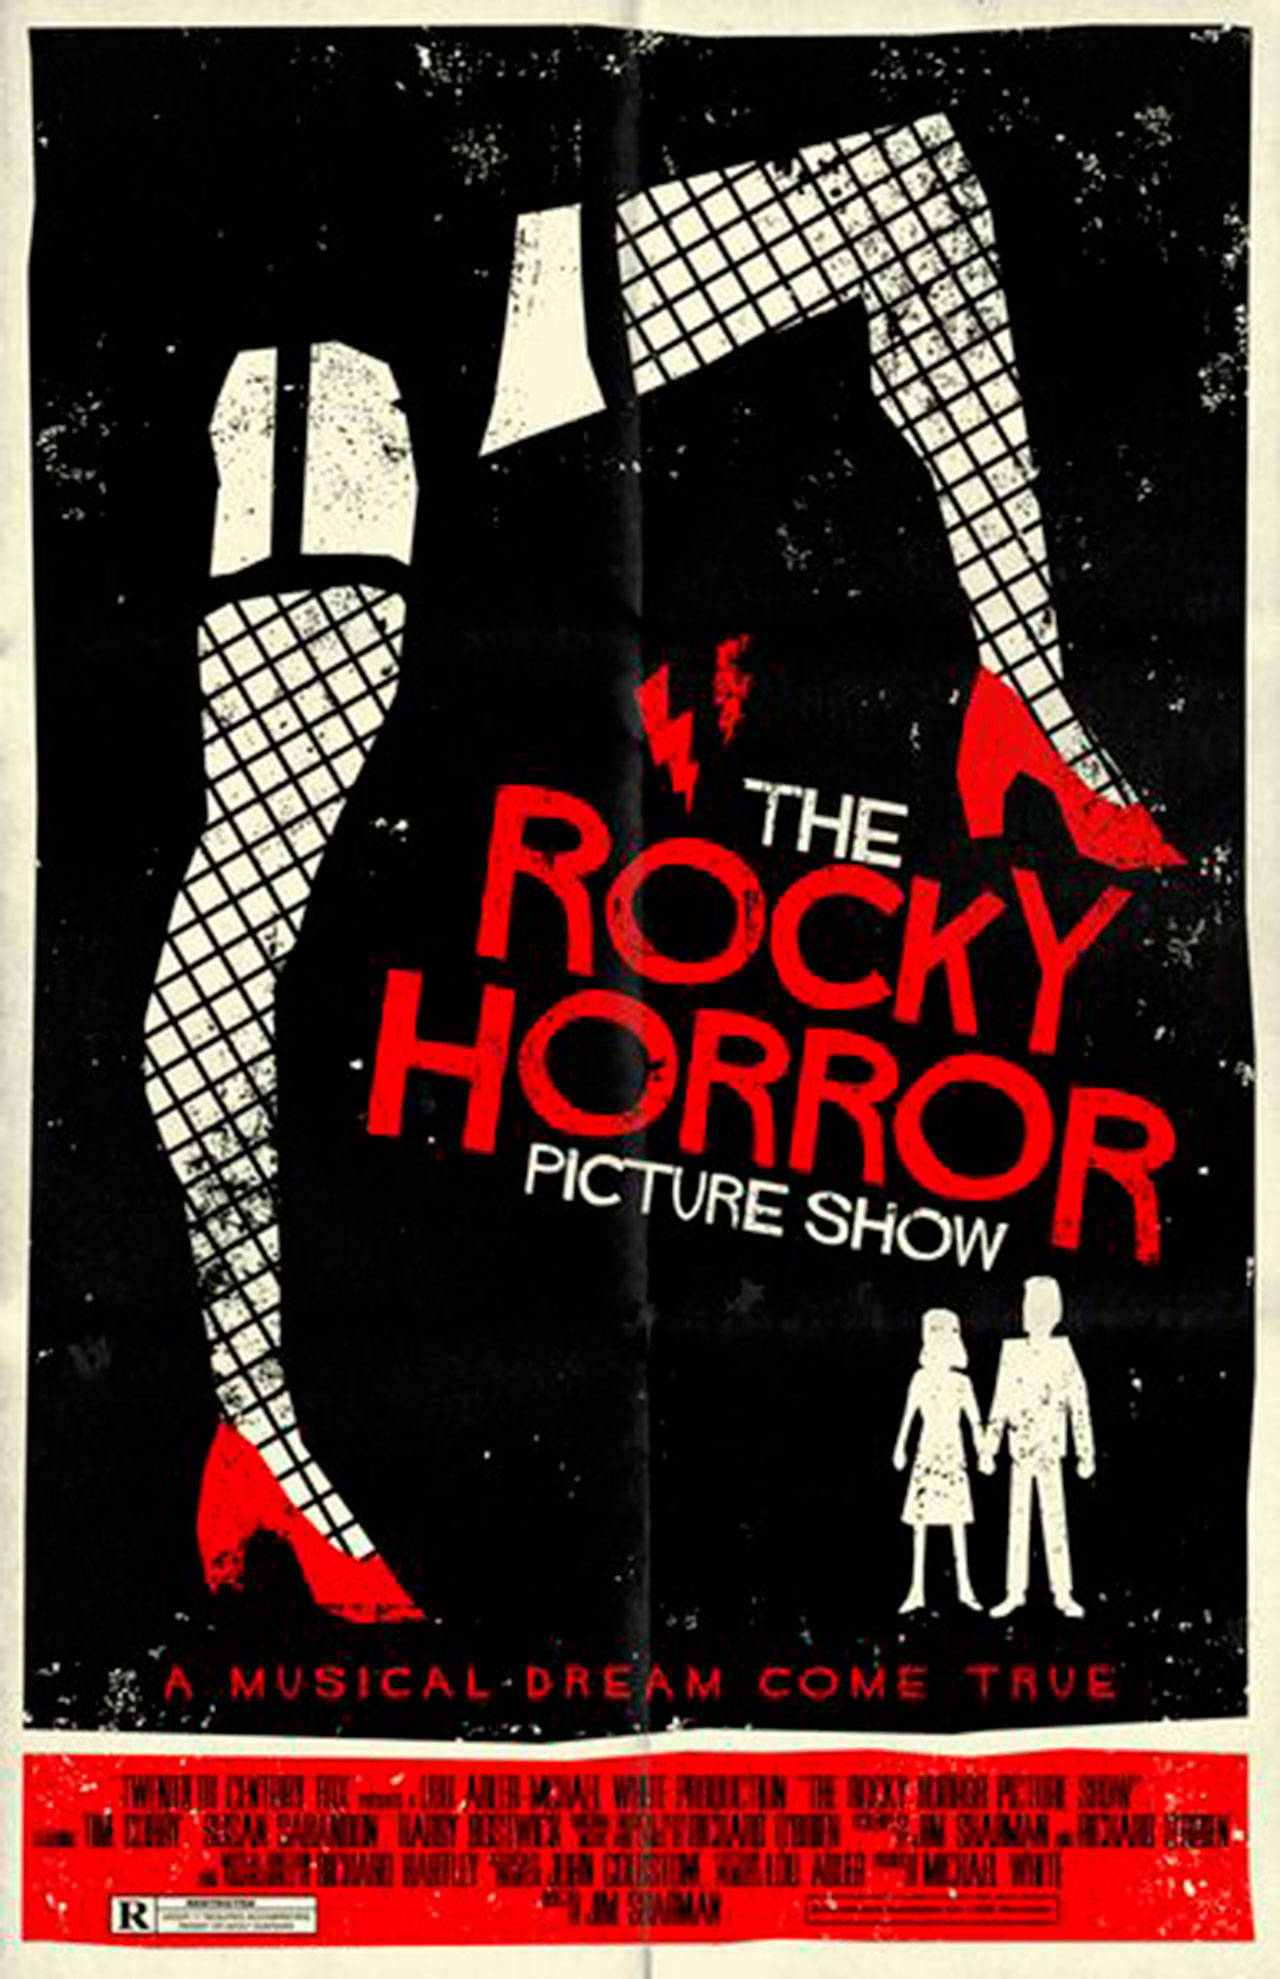 Image courtesy of 20th Century Fox | The beloved cult phenomenon that is “The Rocky Horror Picture Show” (1975) is returning once more to Bainbridge Cinemas for a seasonal screening at 9 p.m. Saturday, Oct. 28.